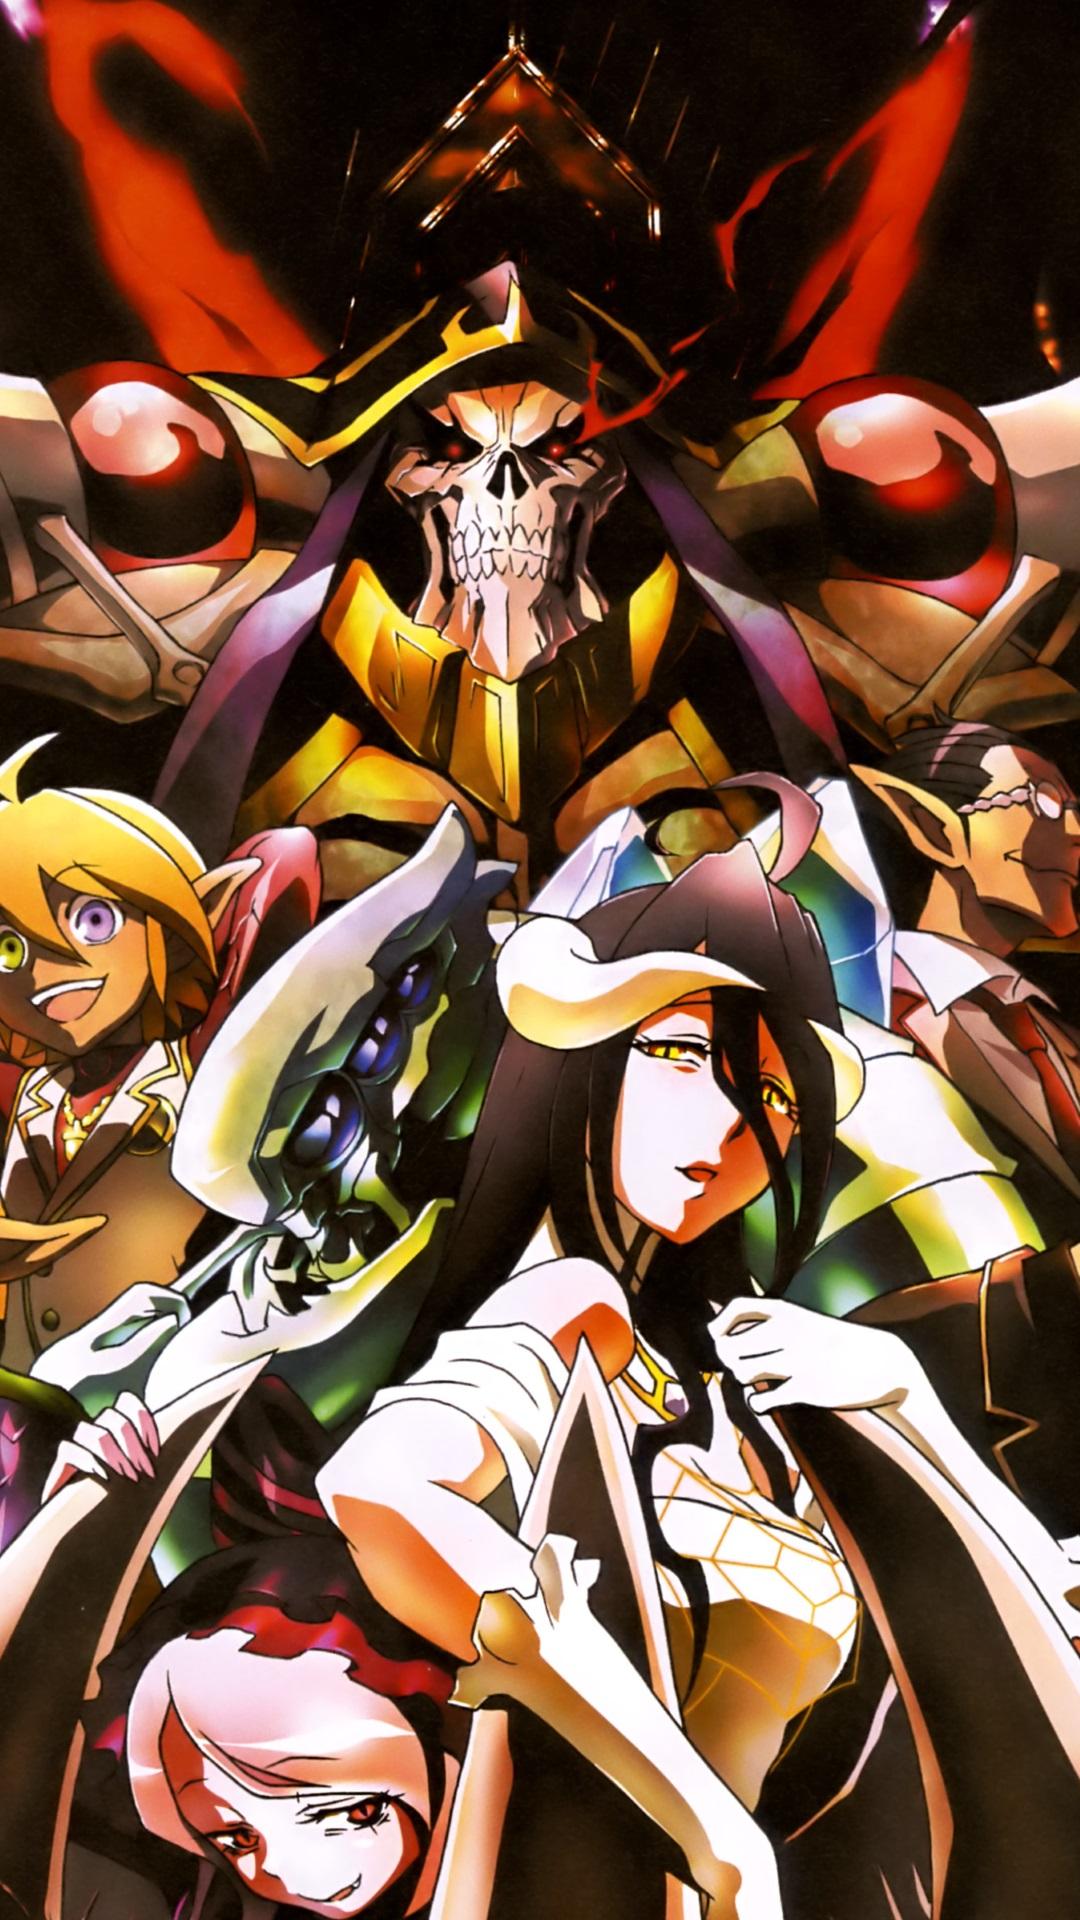 Overlord anime wallpaper for smartphones